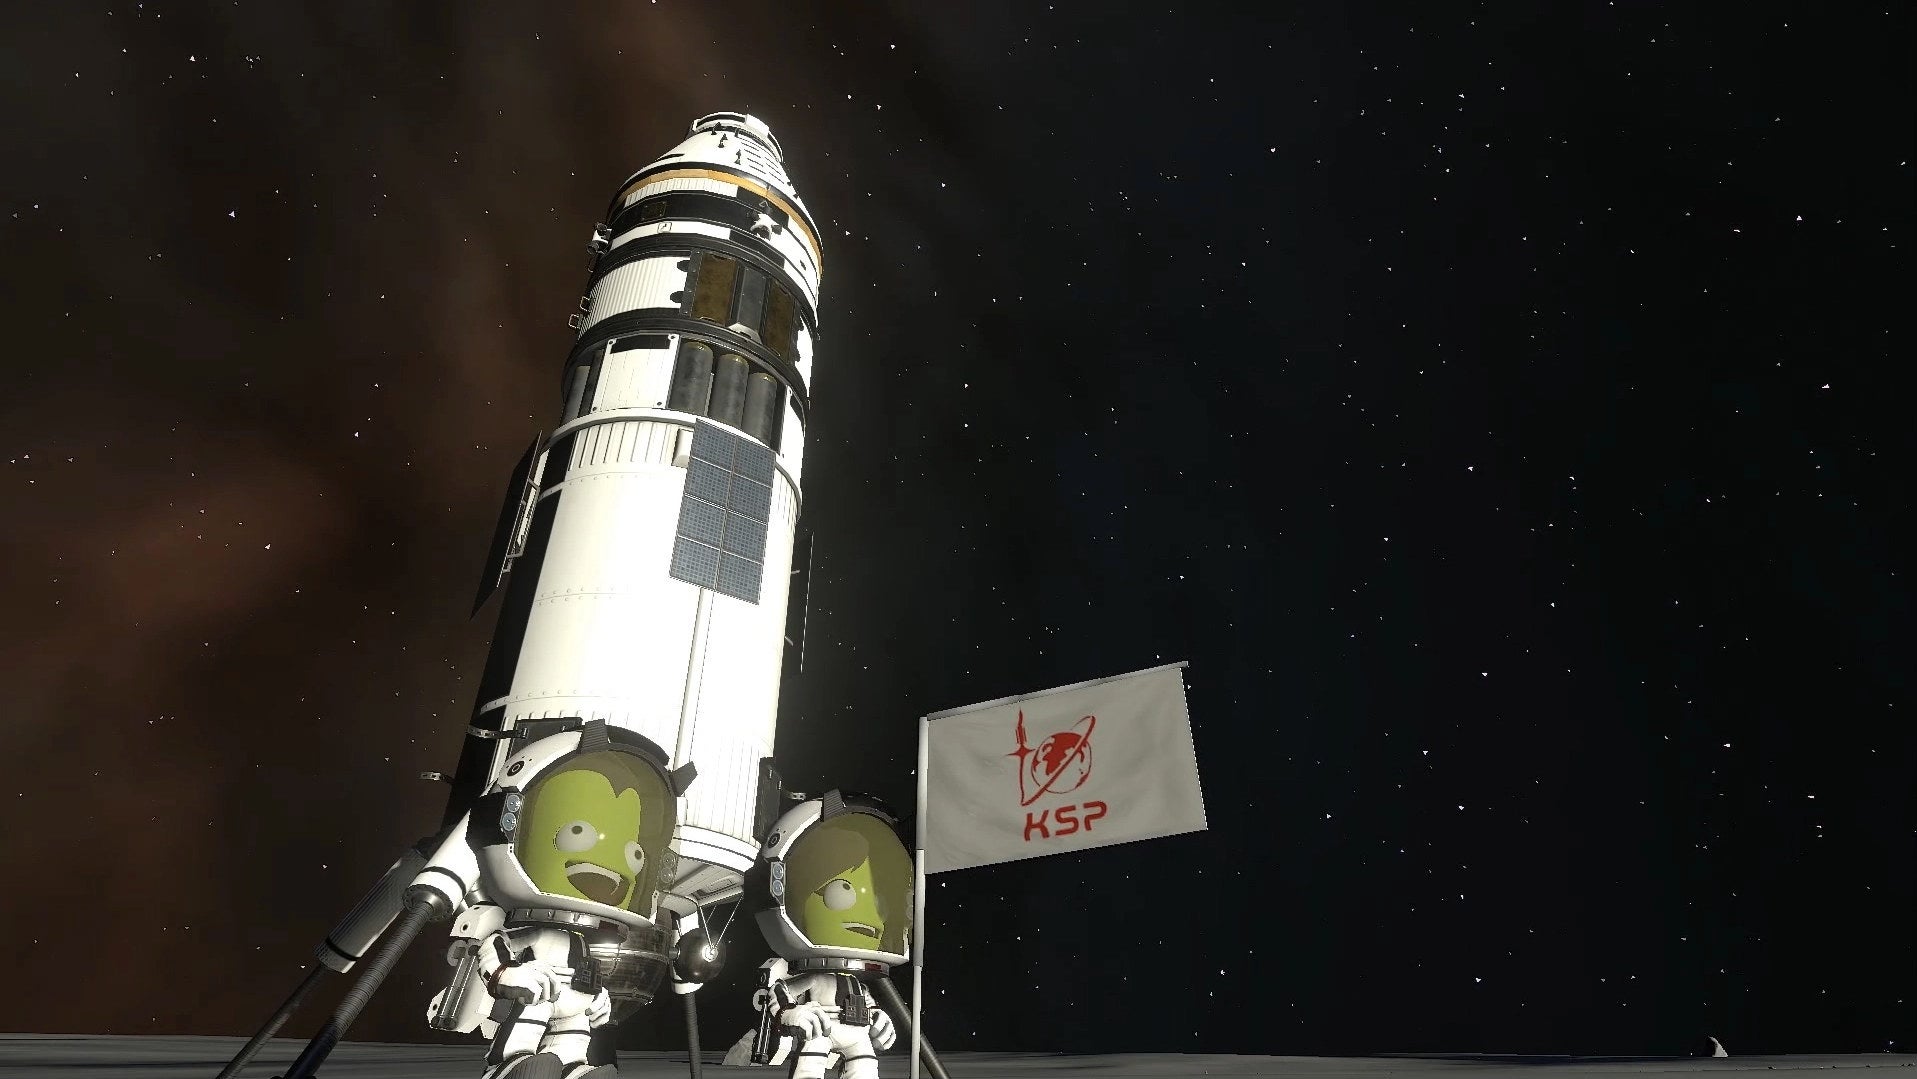 Kerbal Space Program 2 is coming with official multiplayer